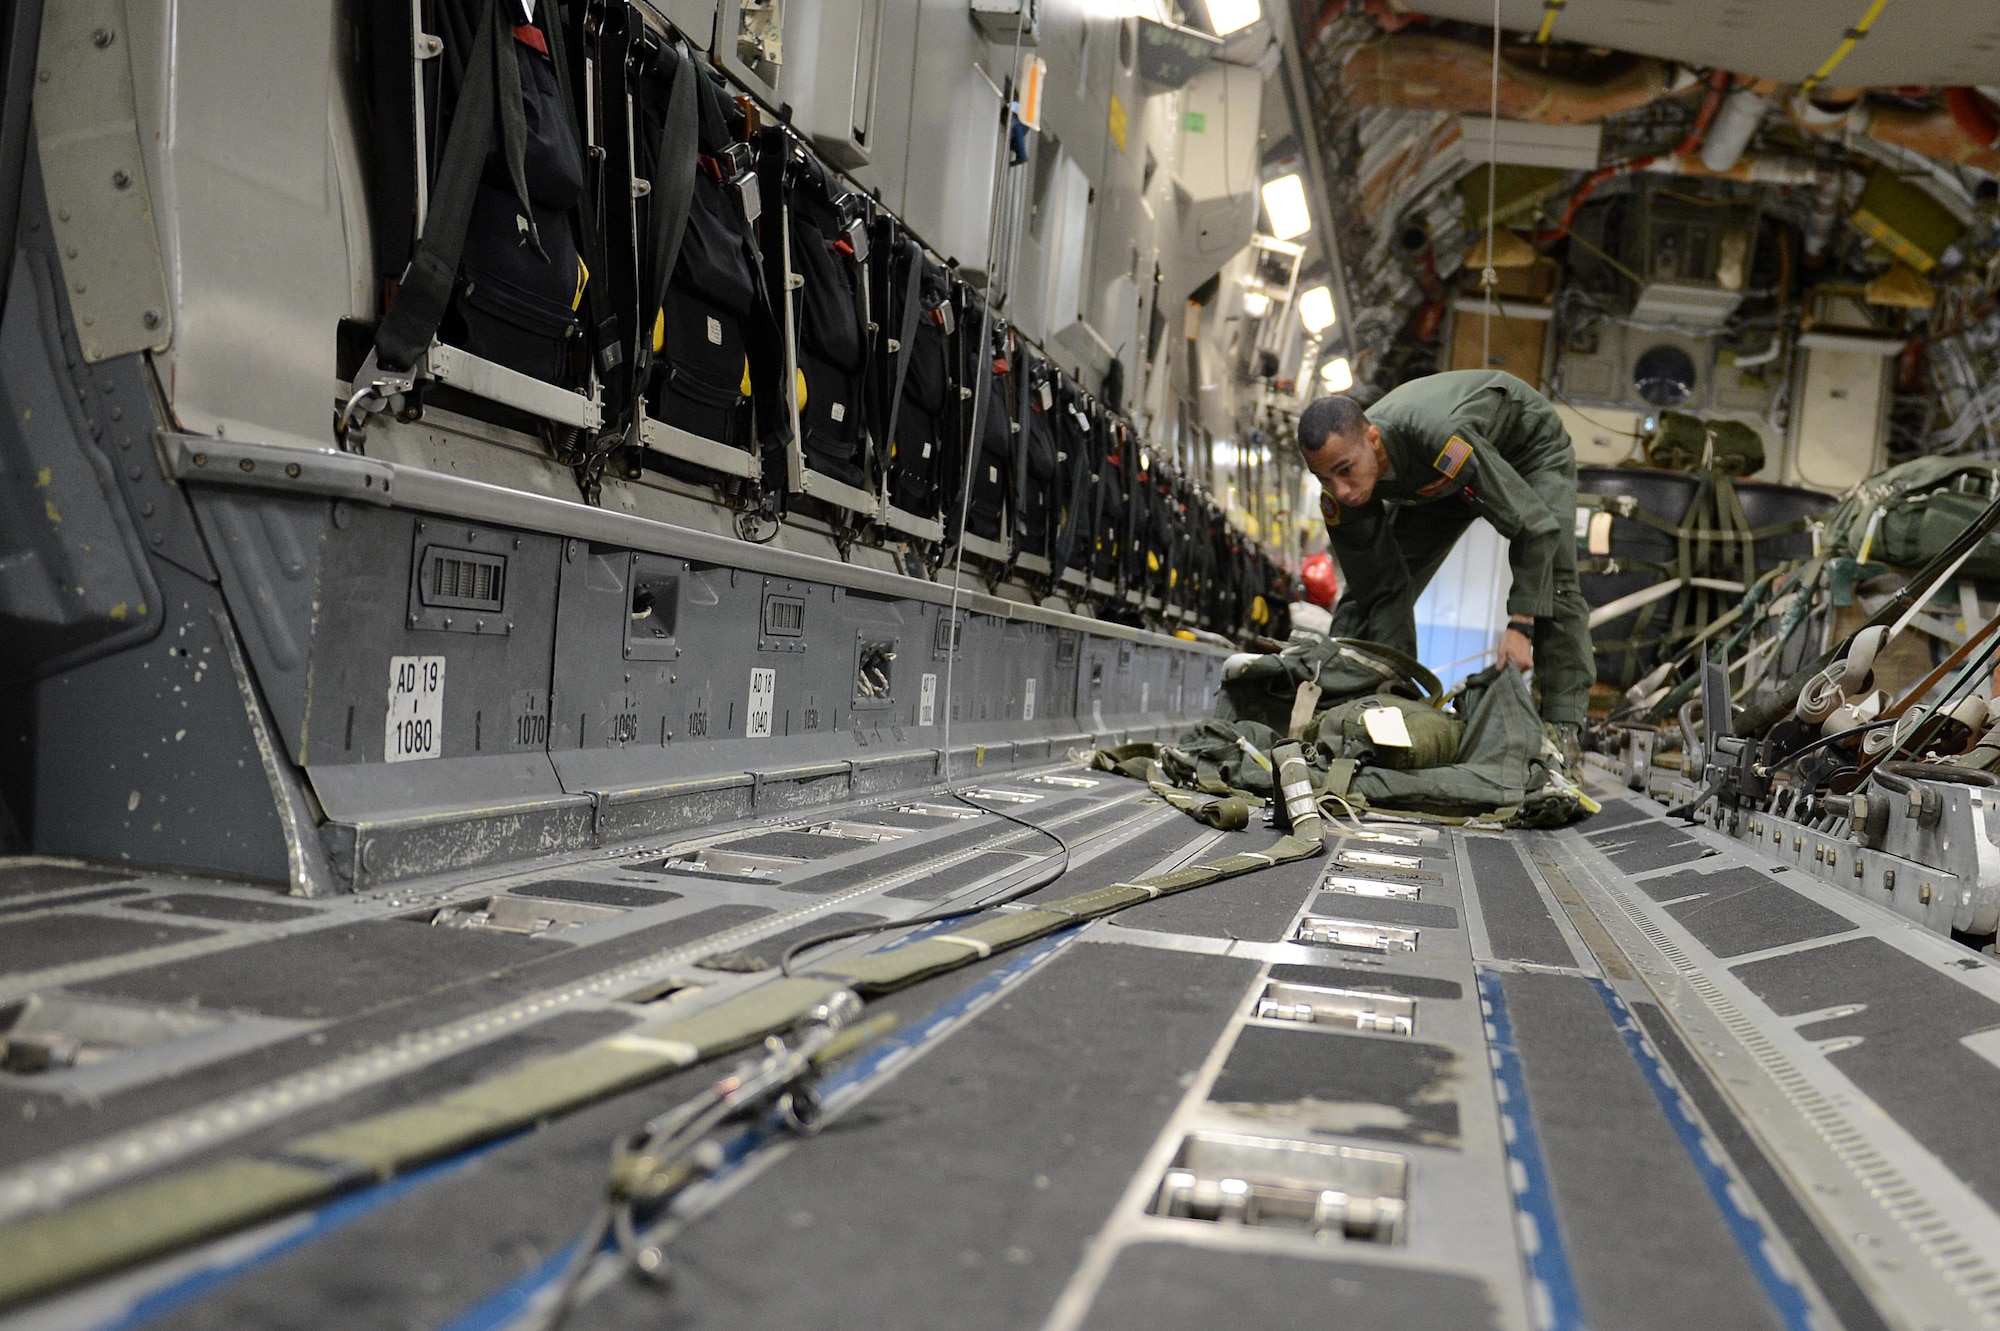 Staff Sgt. Joseph Timpson, a 10th Airlift Squadron loadmaster, checks over a parachute for an airdrop during exercise Rainier War Dec. 10, 2015, on the flightline at Joint Base Lewis-McChord, Wash. The parachute is used to pull the cargo out of the aircraft before another parachute opens up and safely drops the cargo on the drop zone. (U.S. Air Force photo/Senior Airman Divine Cox)